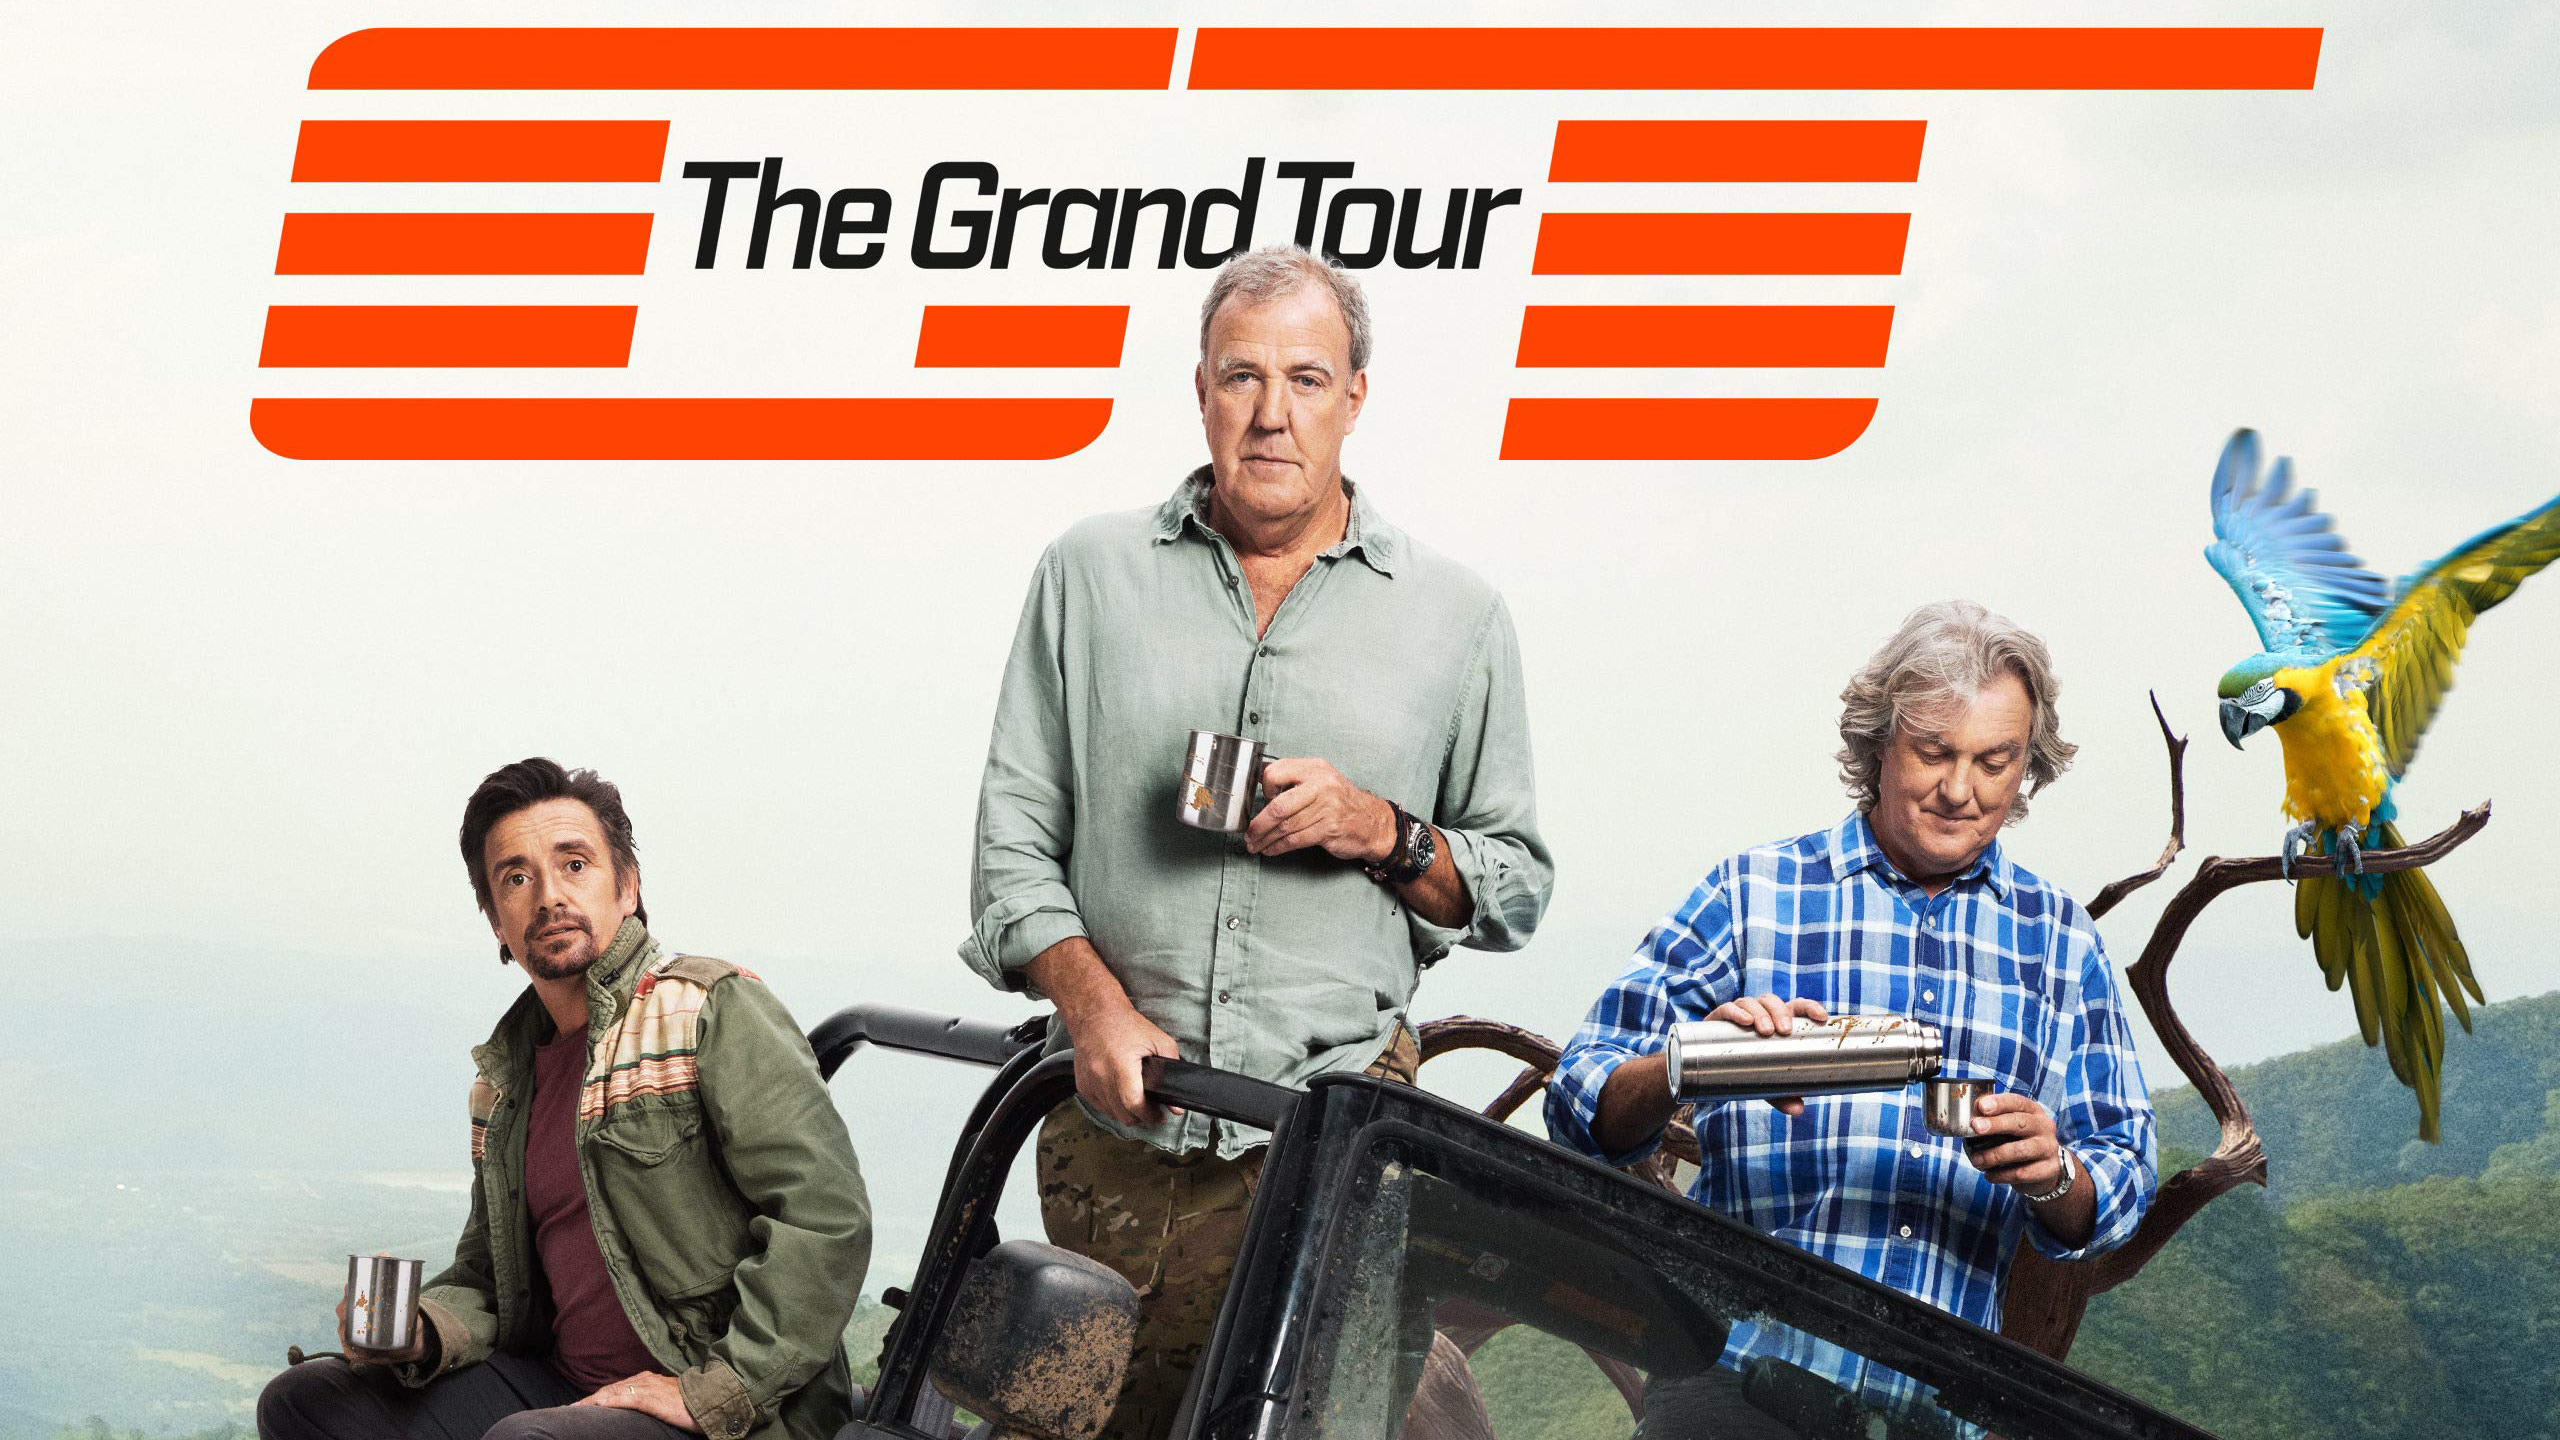 The Grand Tour Tv Series 2019 Wallpaper,HD Tv Shows Wallpapers,4k